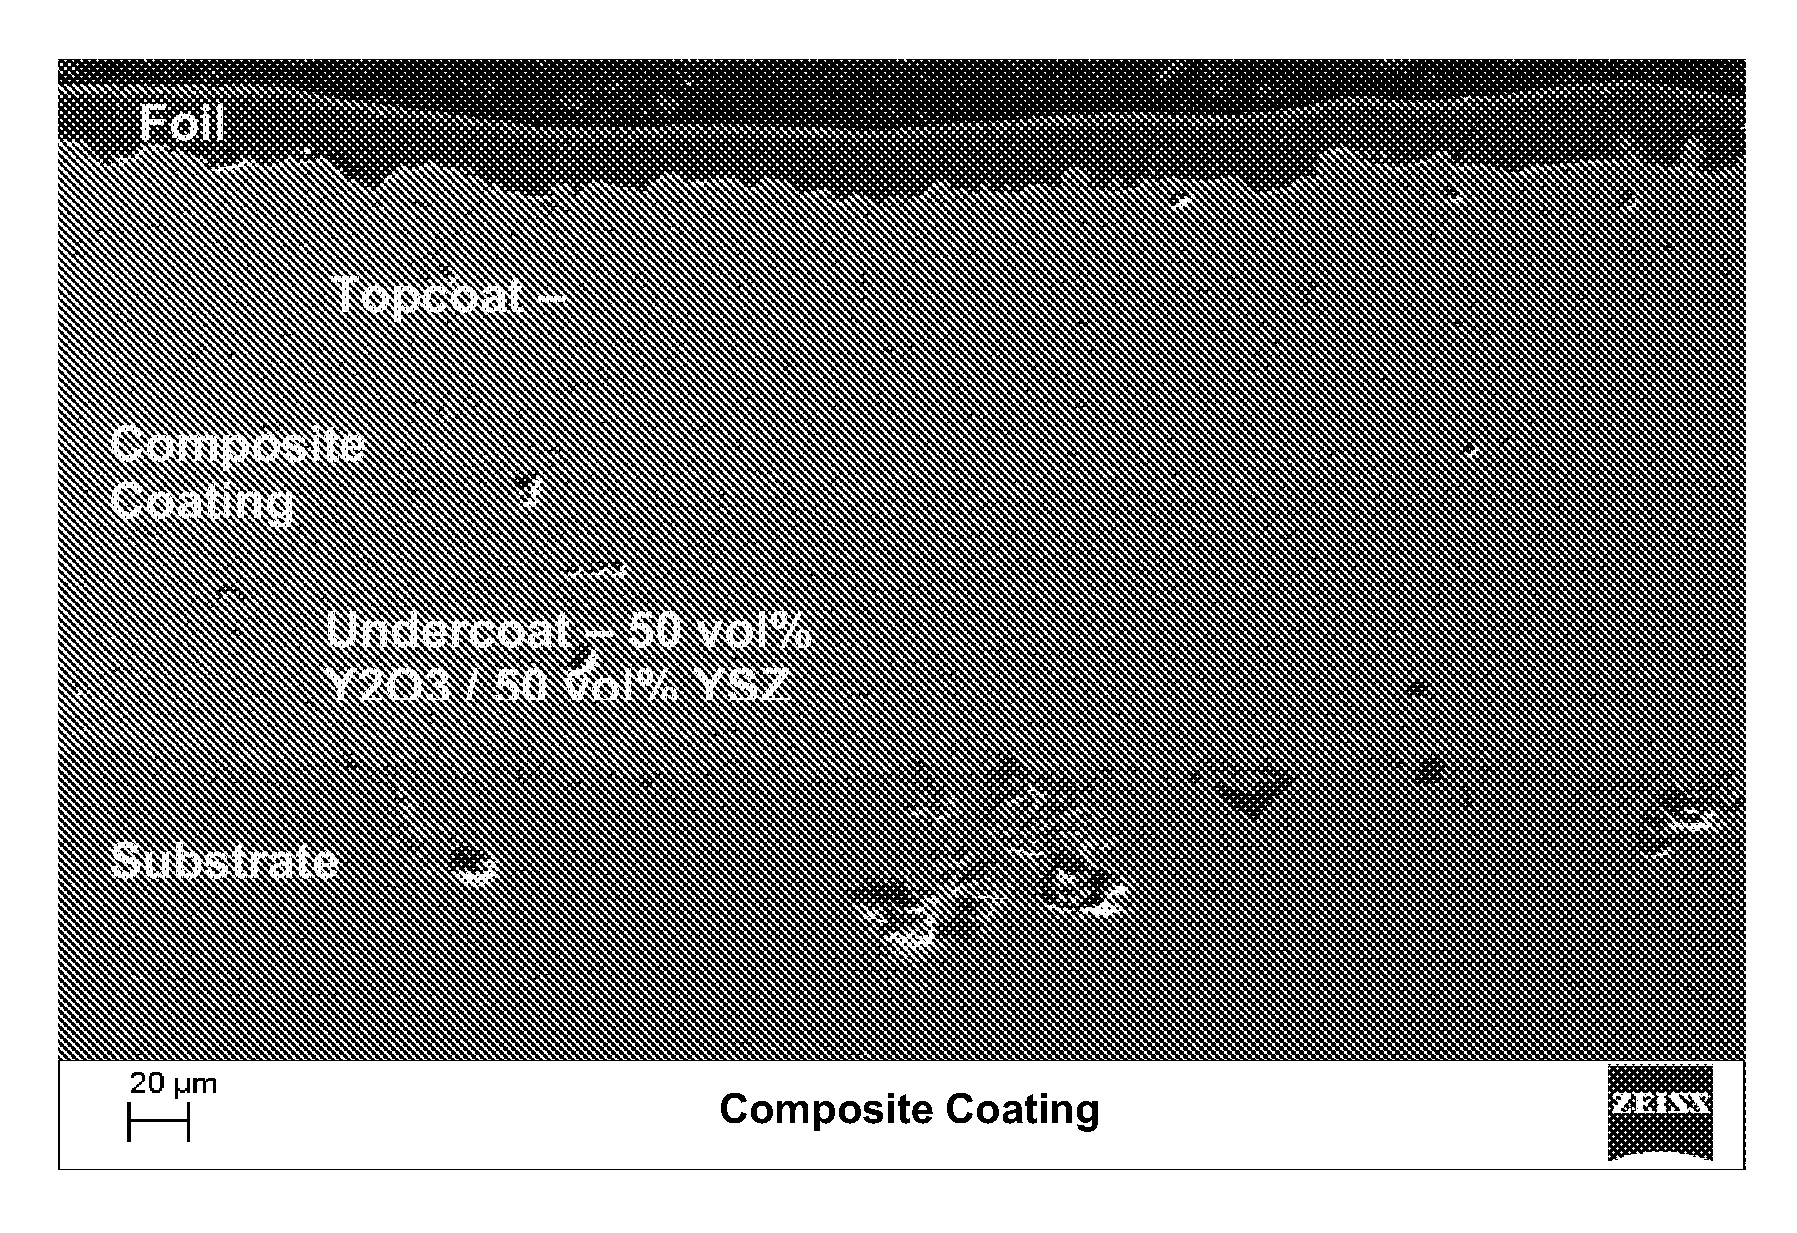 Thermal spray composite coatings for semiconductor applications